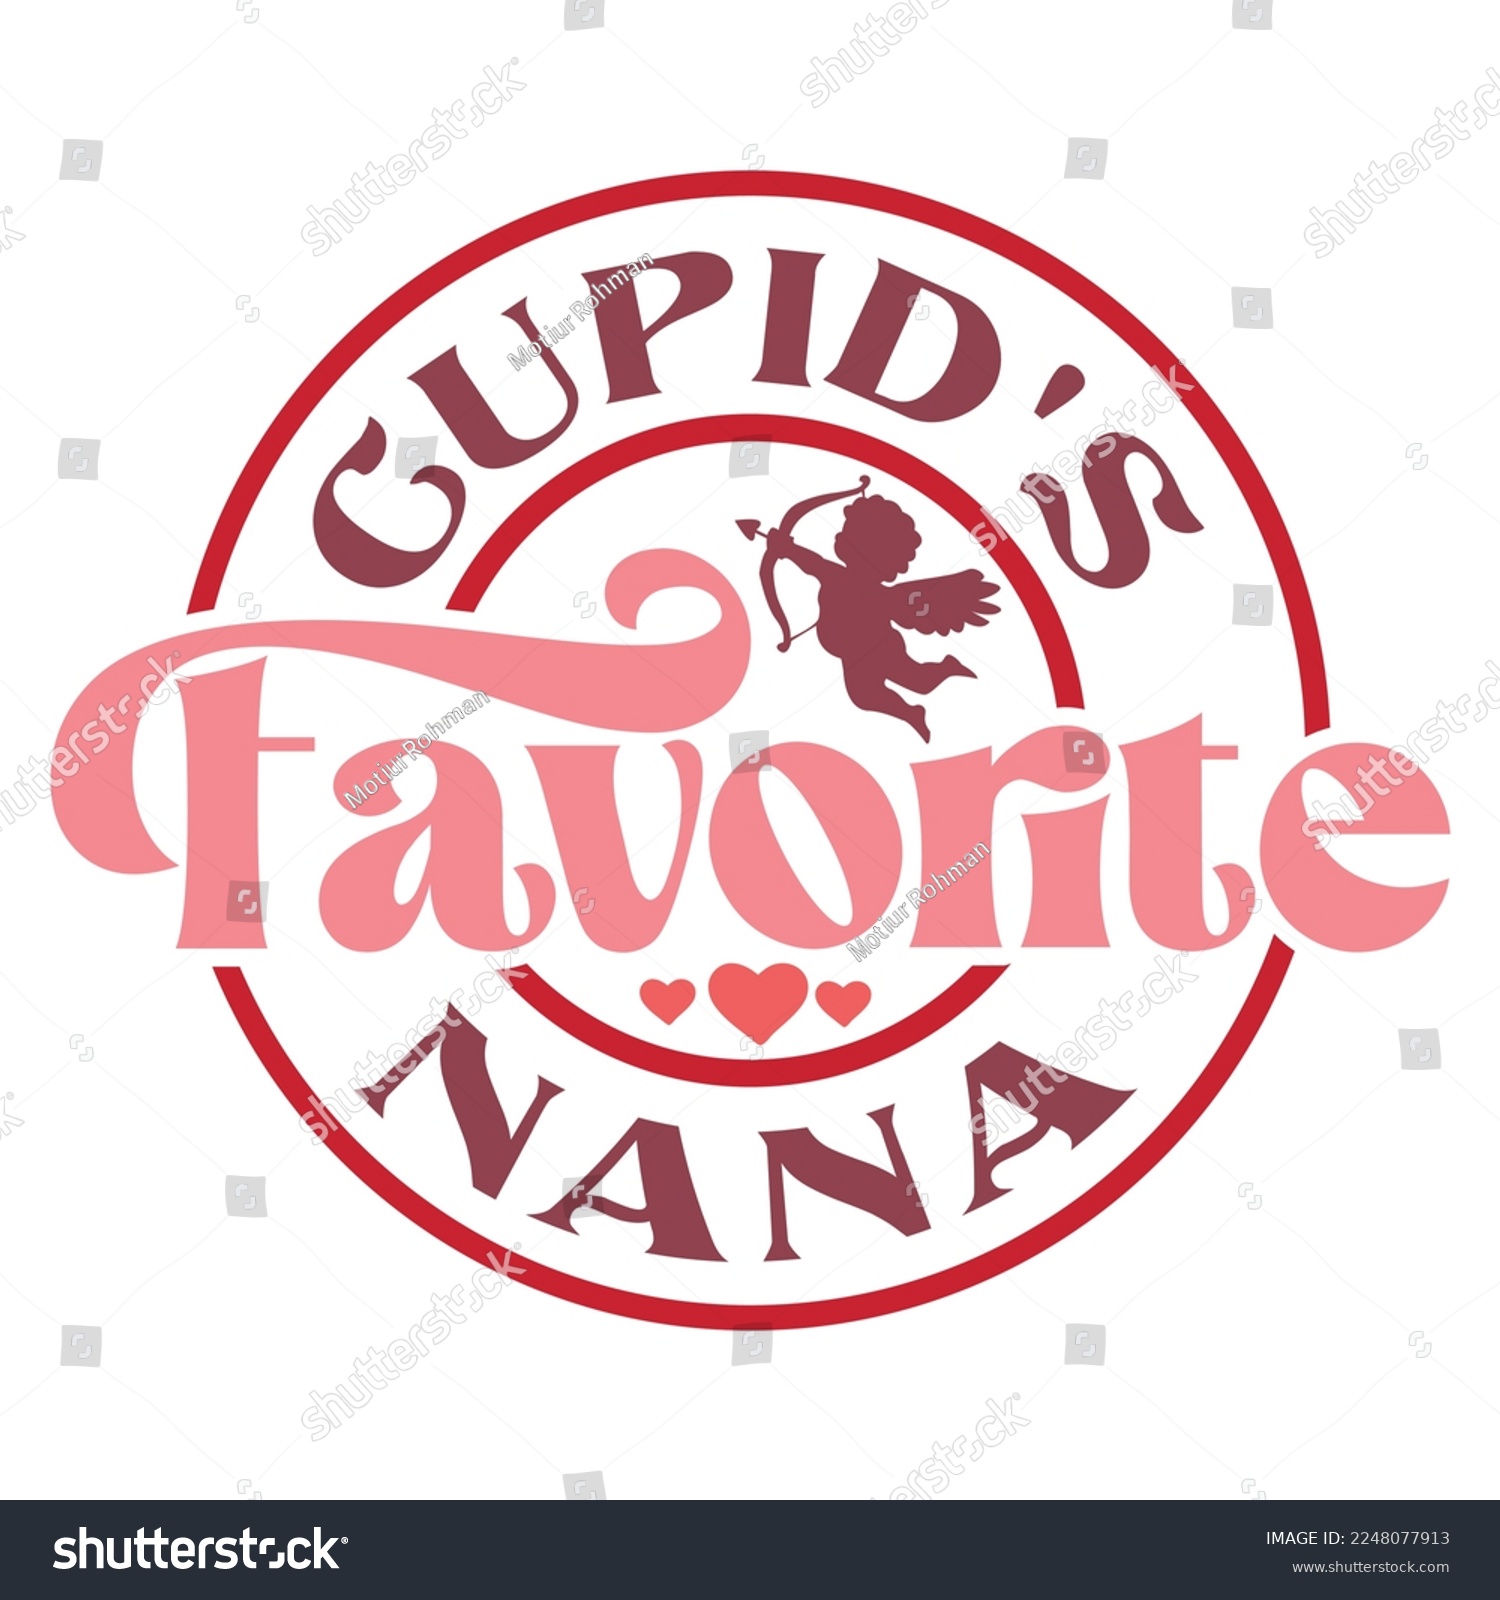 SVG of Cupid's Favorite Nana Valentine's Day Love quote retro wavy groovy typography sublimation SVG on white background svg